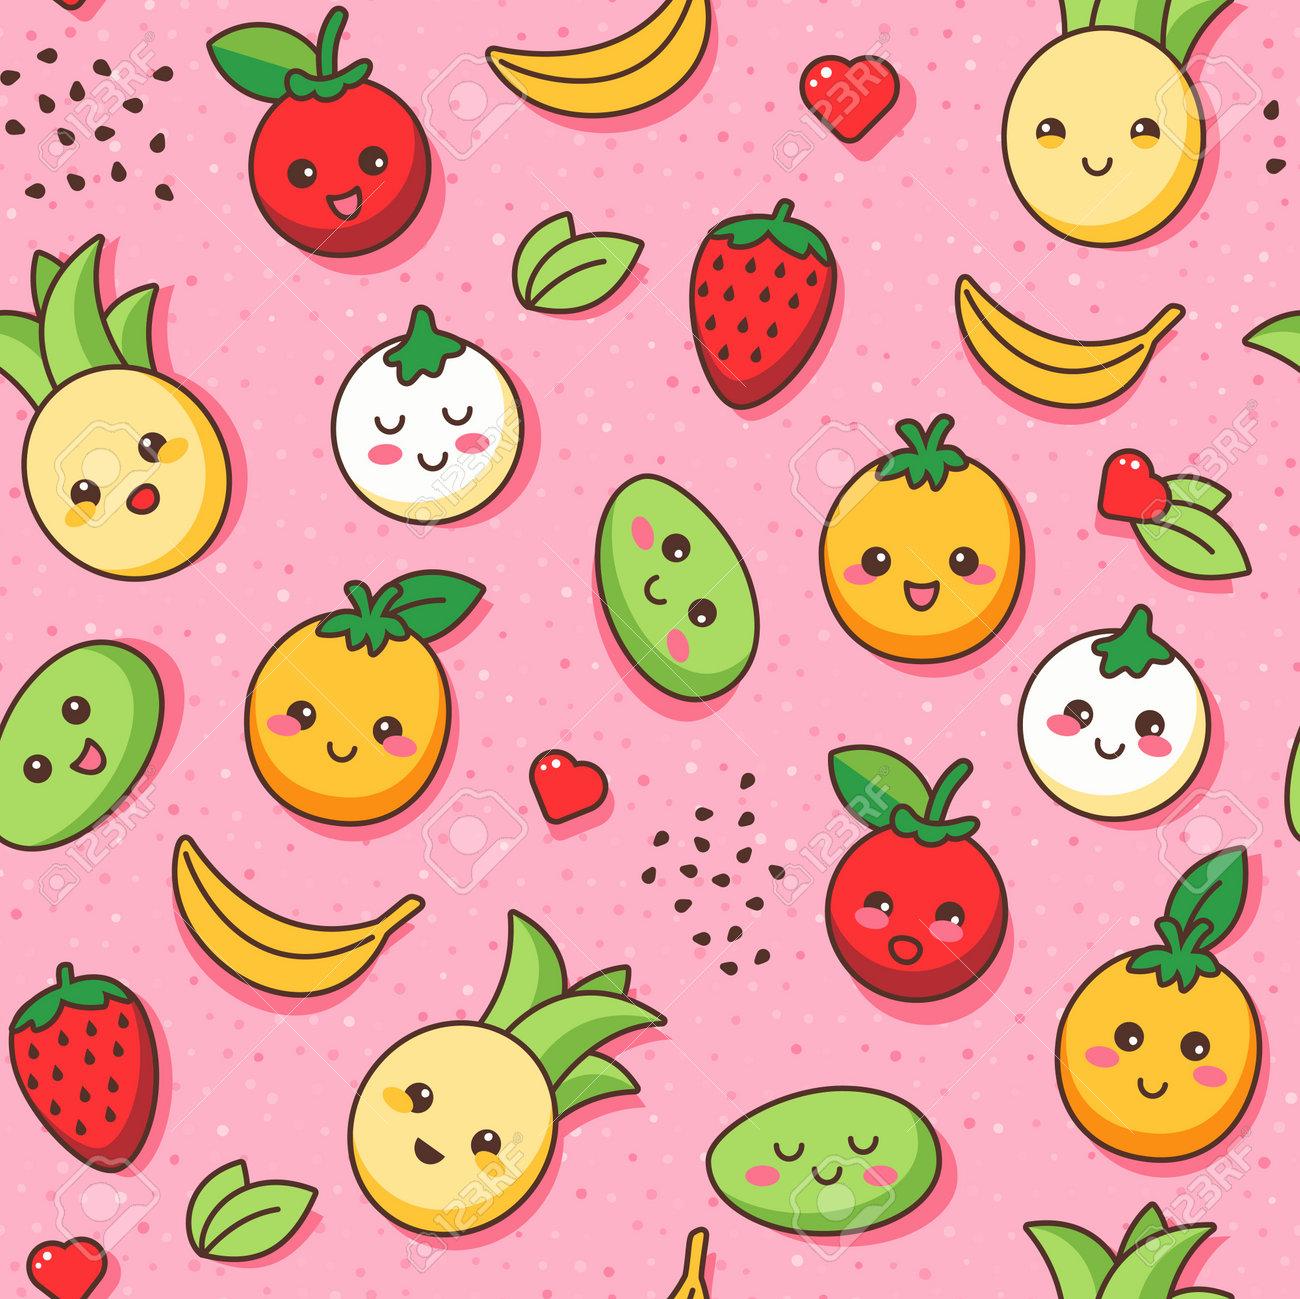 Joyful And Bright Summer Pattern With Juicy Tropical Fruits